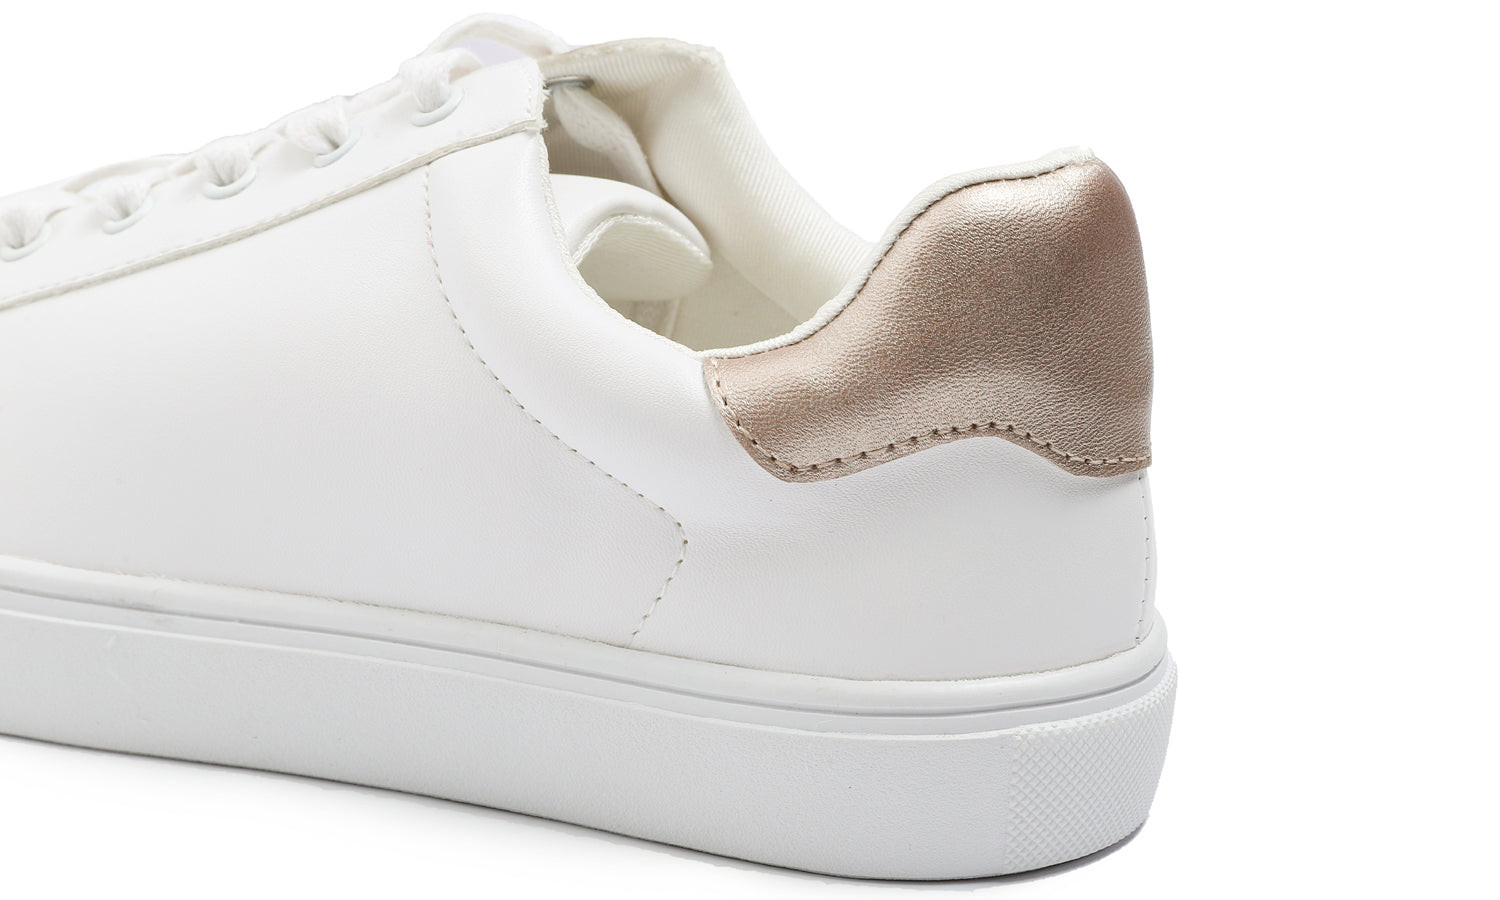 Feversole Women's Featured PU Leather White Rose Gold Lace Up Sneaker